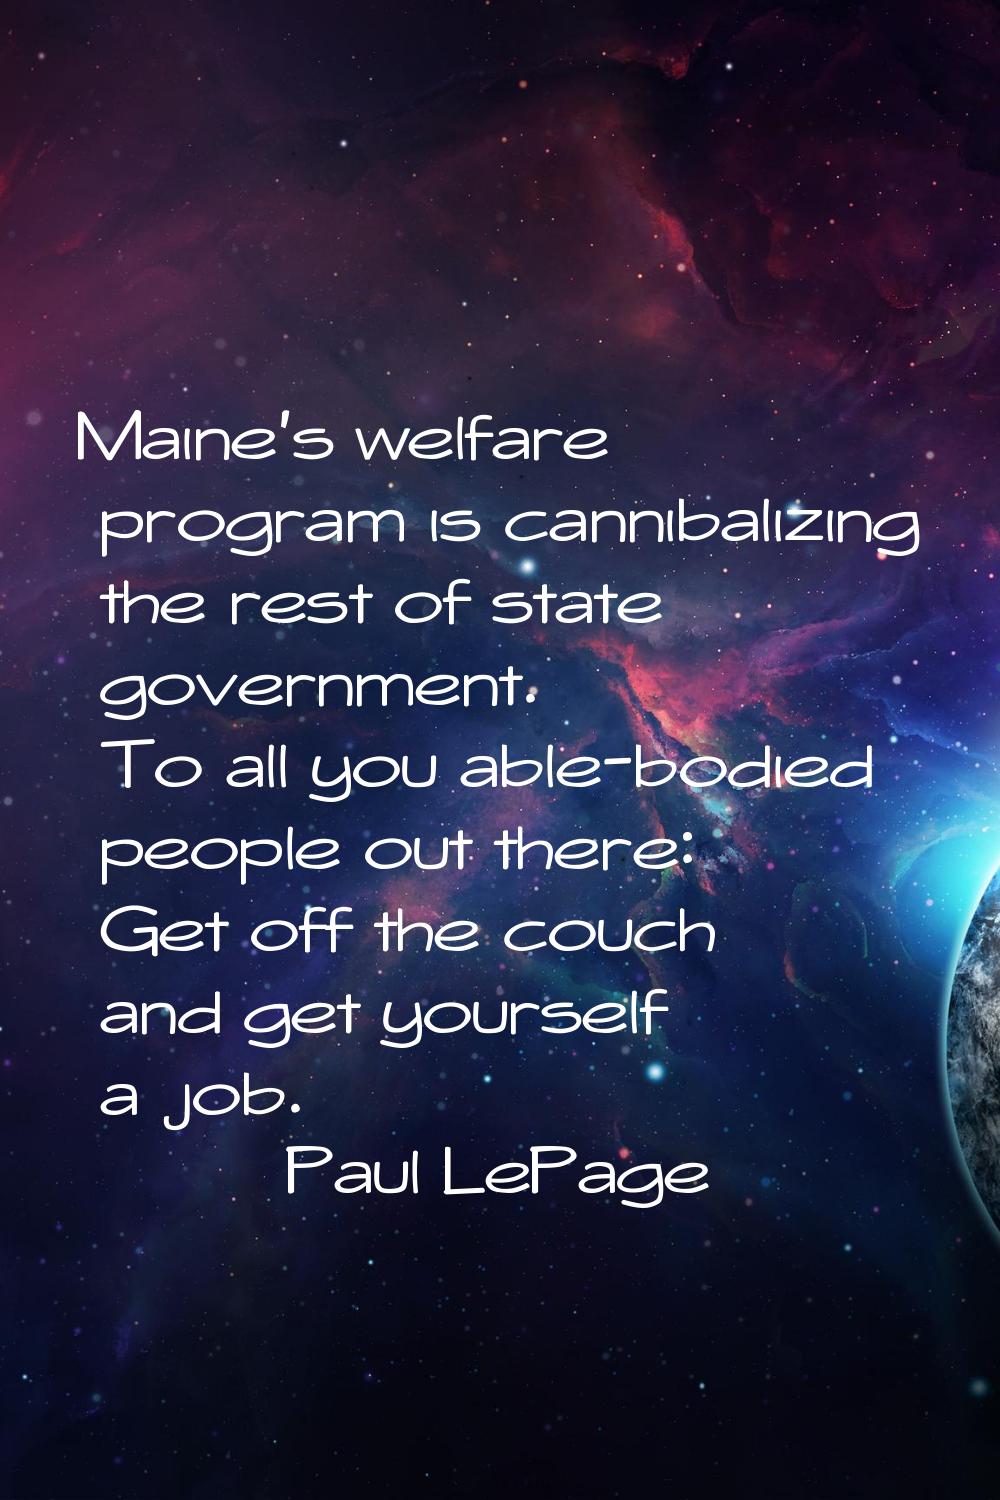 Maine's welfare program is cannibalizing the rest of state government. To all you able-bodied peopl